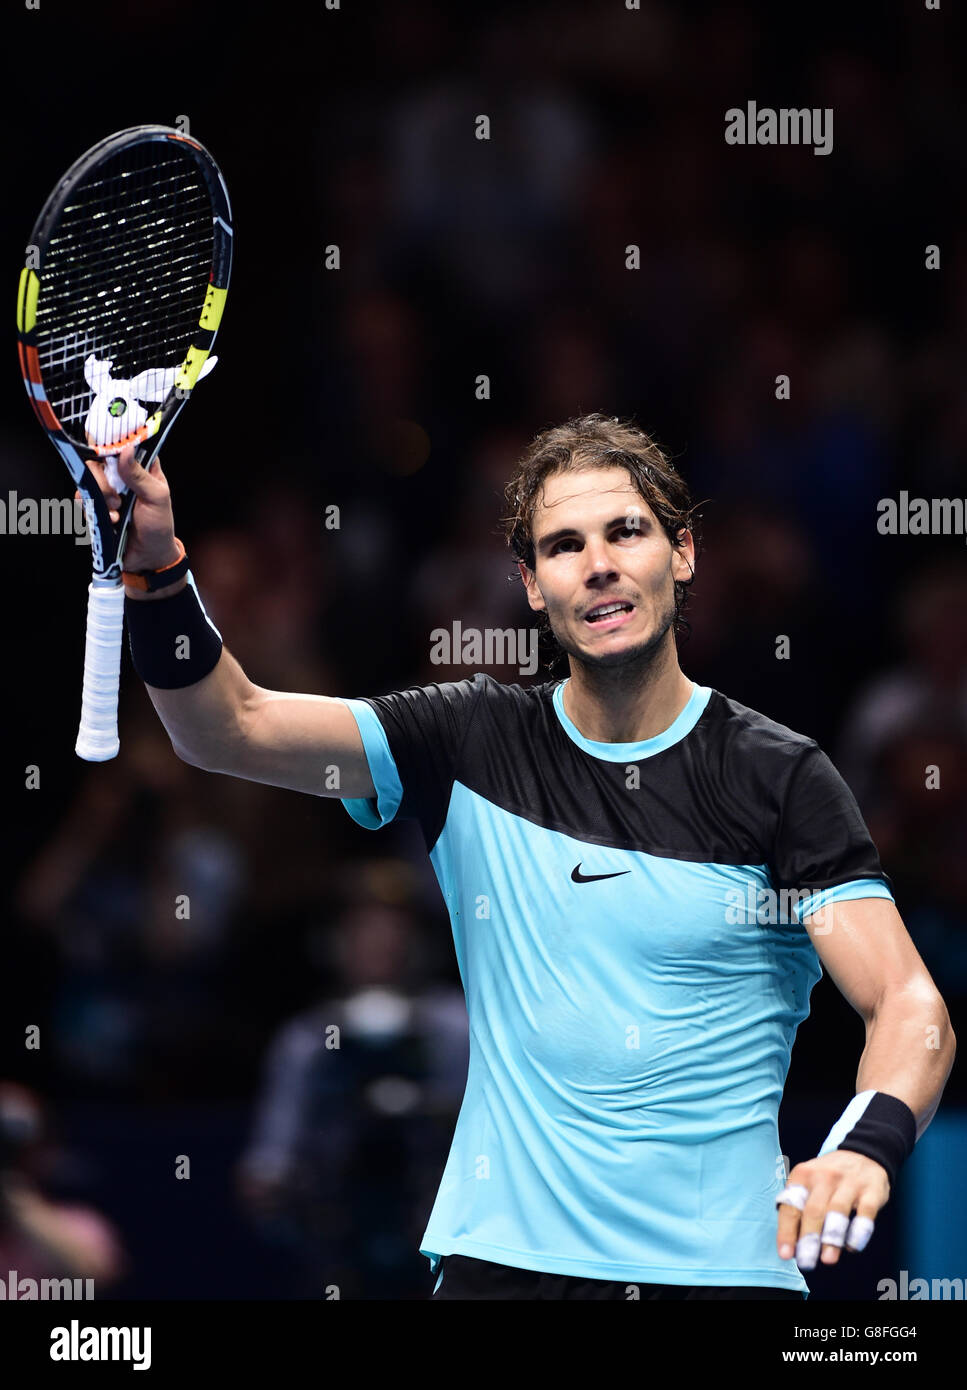 Spain's Rafael Nadal celebrates his win during day four of the ATP World Tour Finals at the O2 Arena, London. PRESS ASSSOCIATION Photo. Picture date: Wednesday November 18, 2015. See PA story TENNIS London. Photo credit should read: Adam Davy/PA Wire. Stock Photo